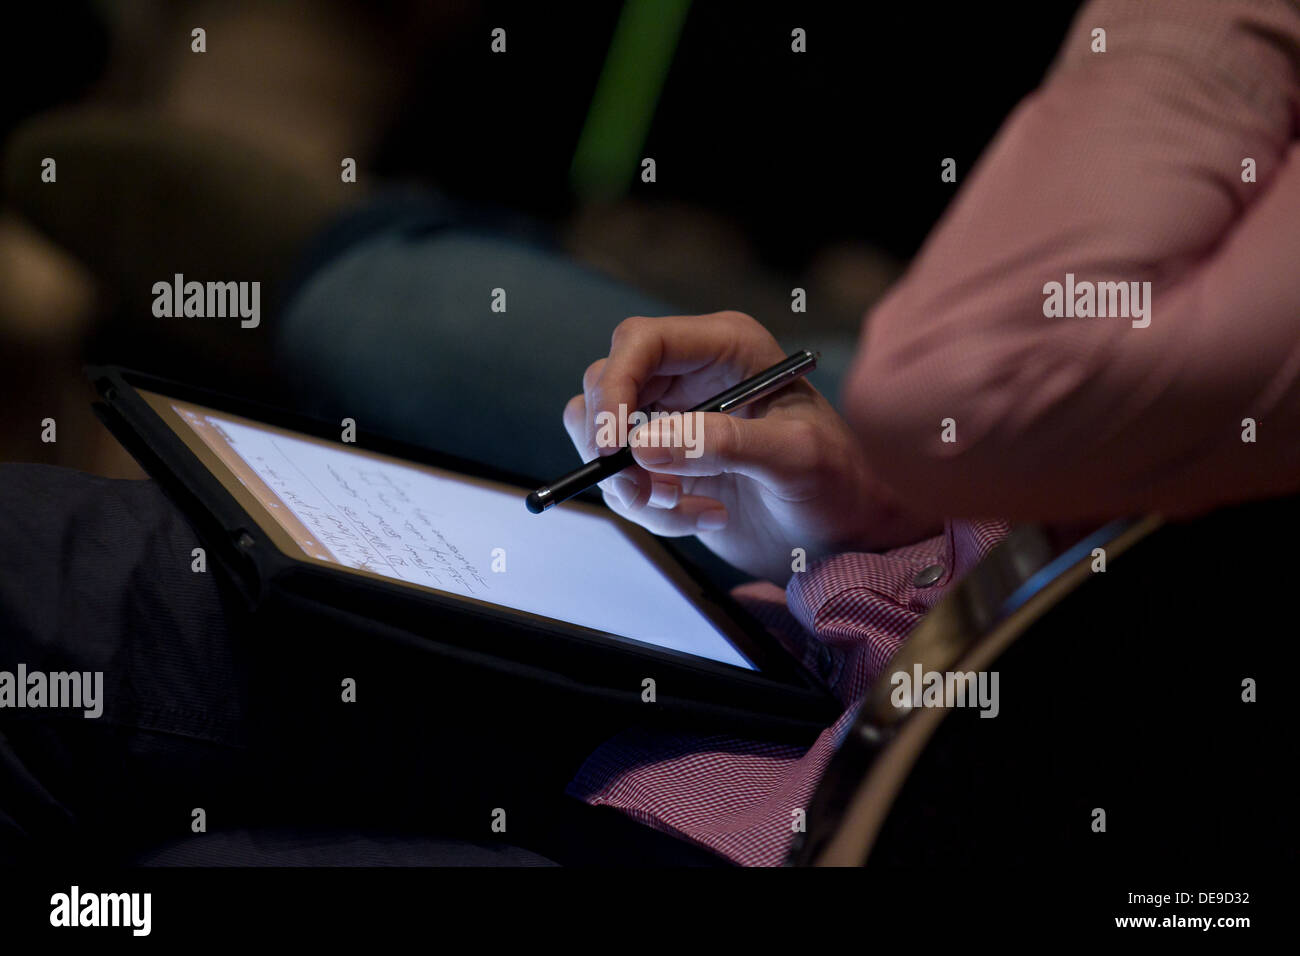 Delegate making notes on an ipad at a conference Stock Photo